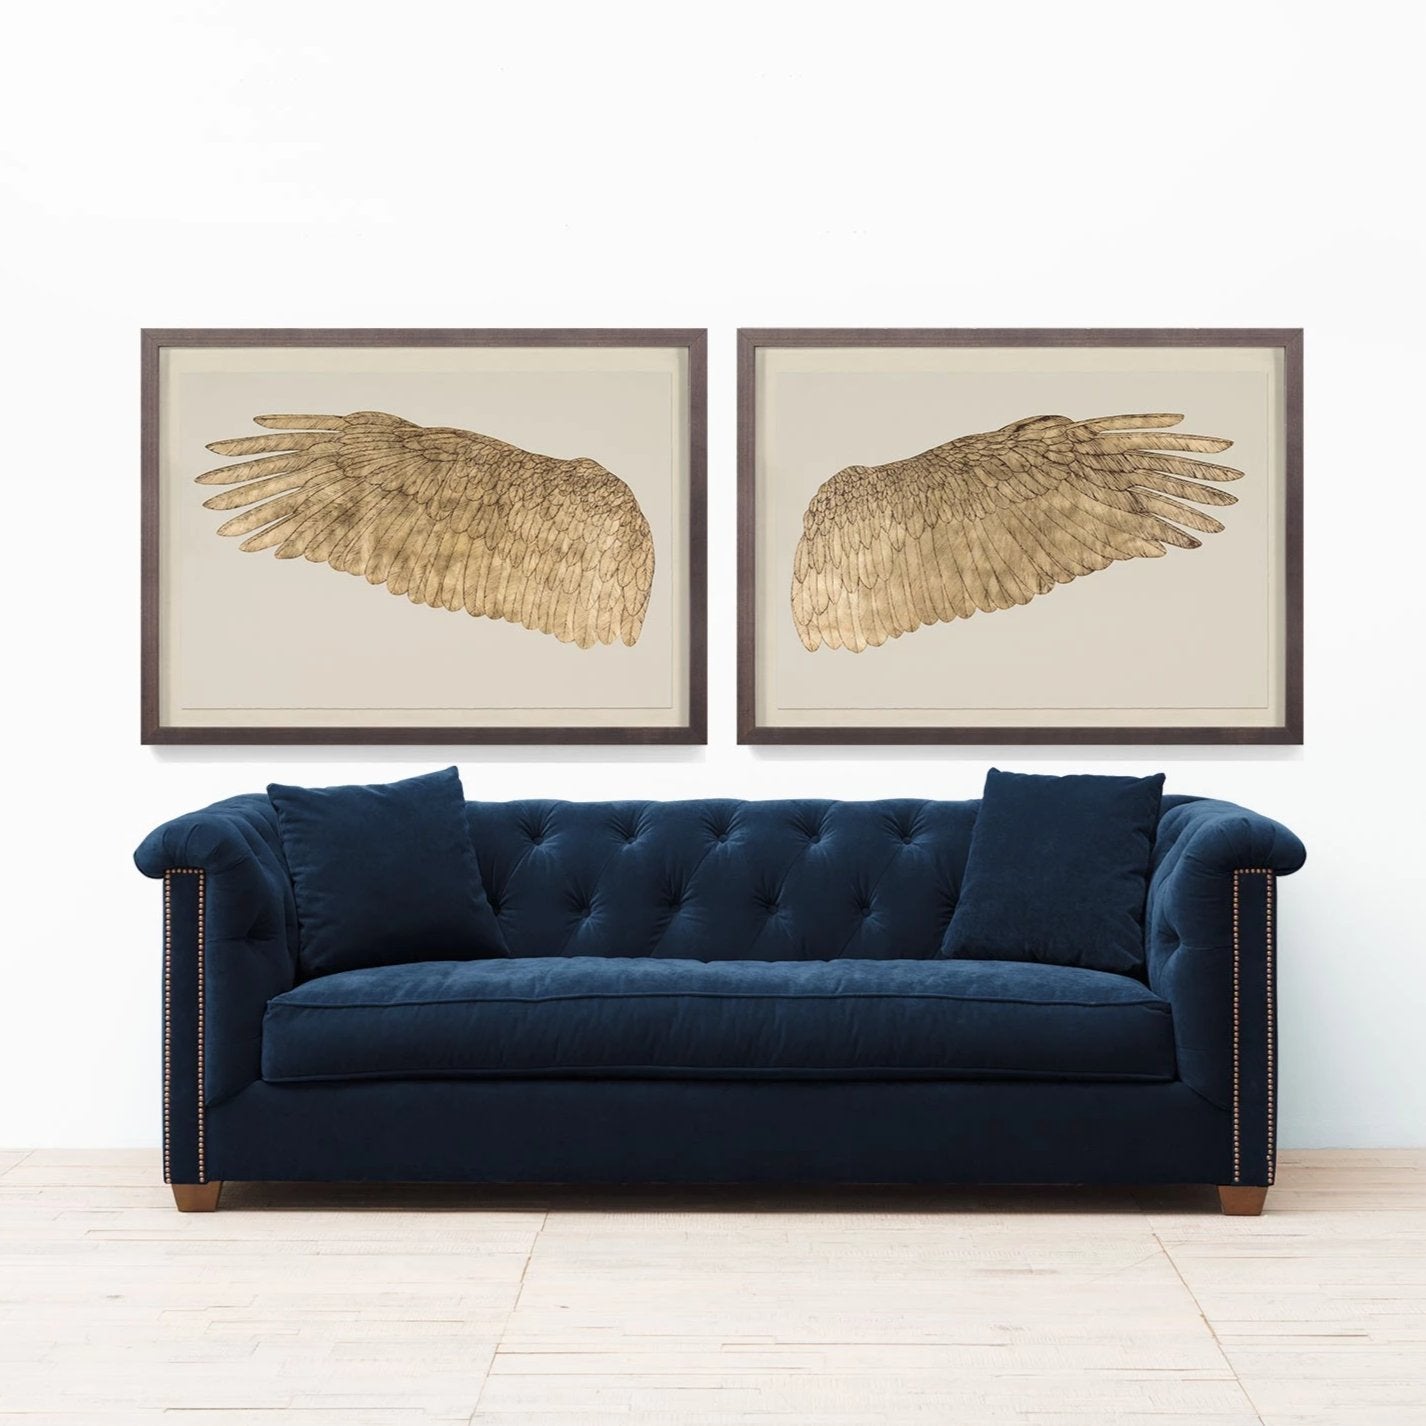 Natural Curiosities Wings of Love Gold Left Artwork Room View